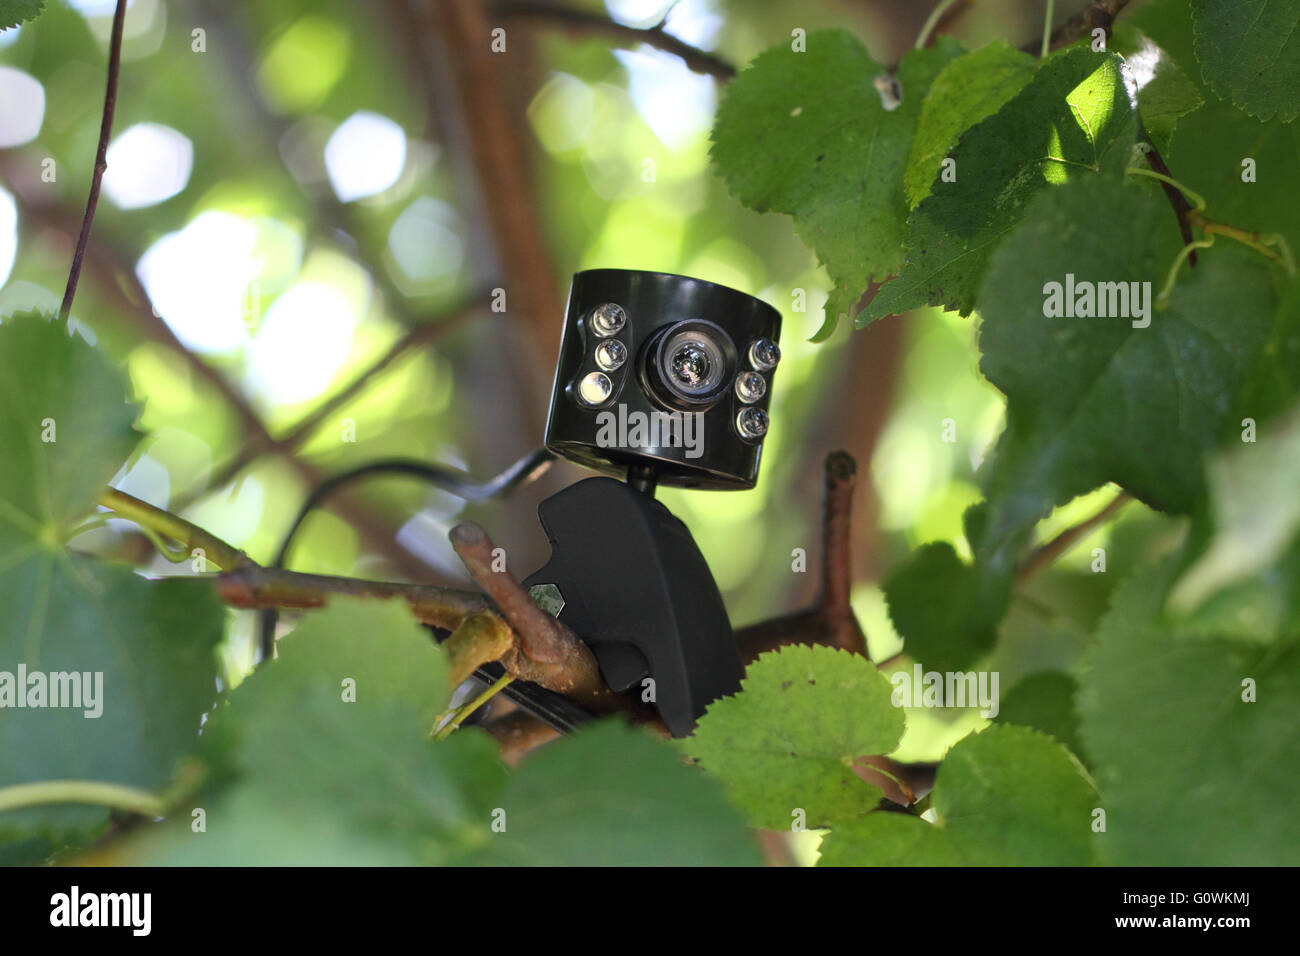 Web camera on the branch of the tree photo Stock Photo